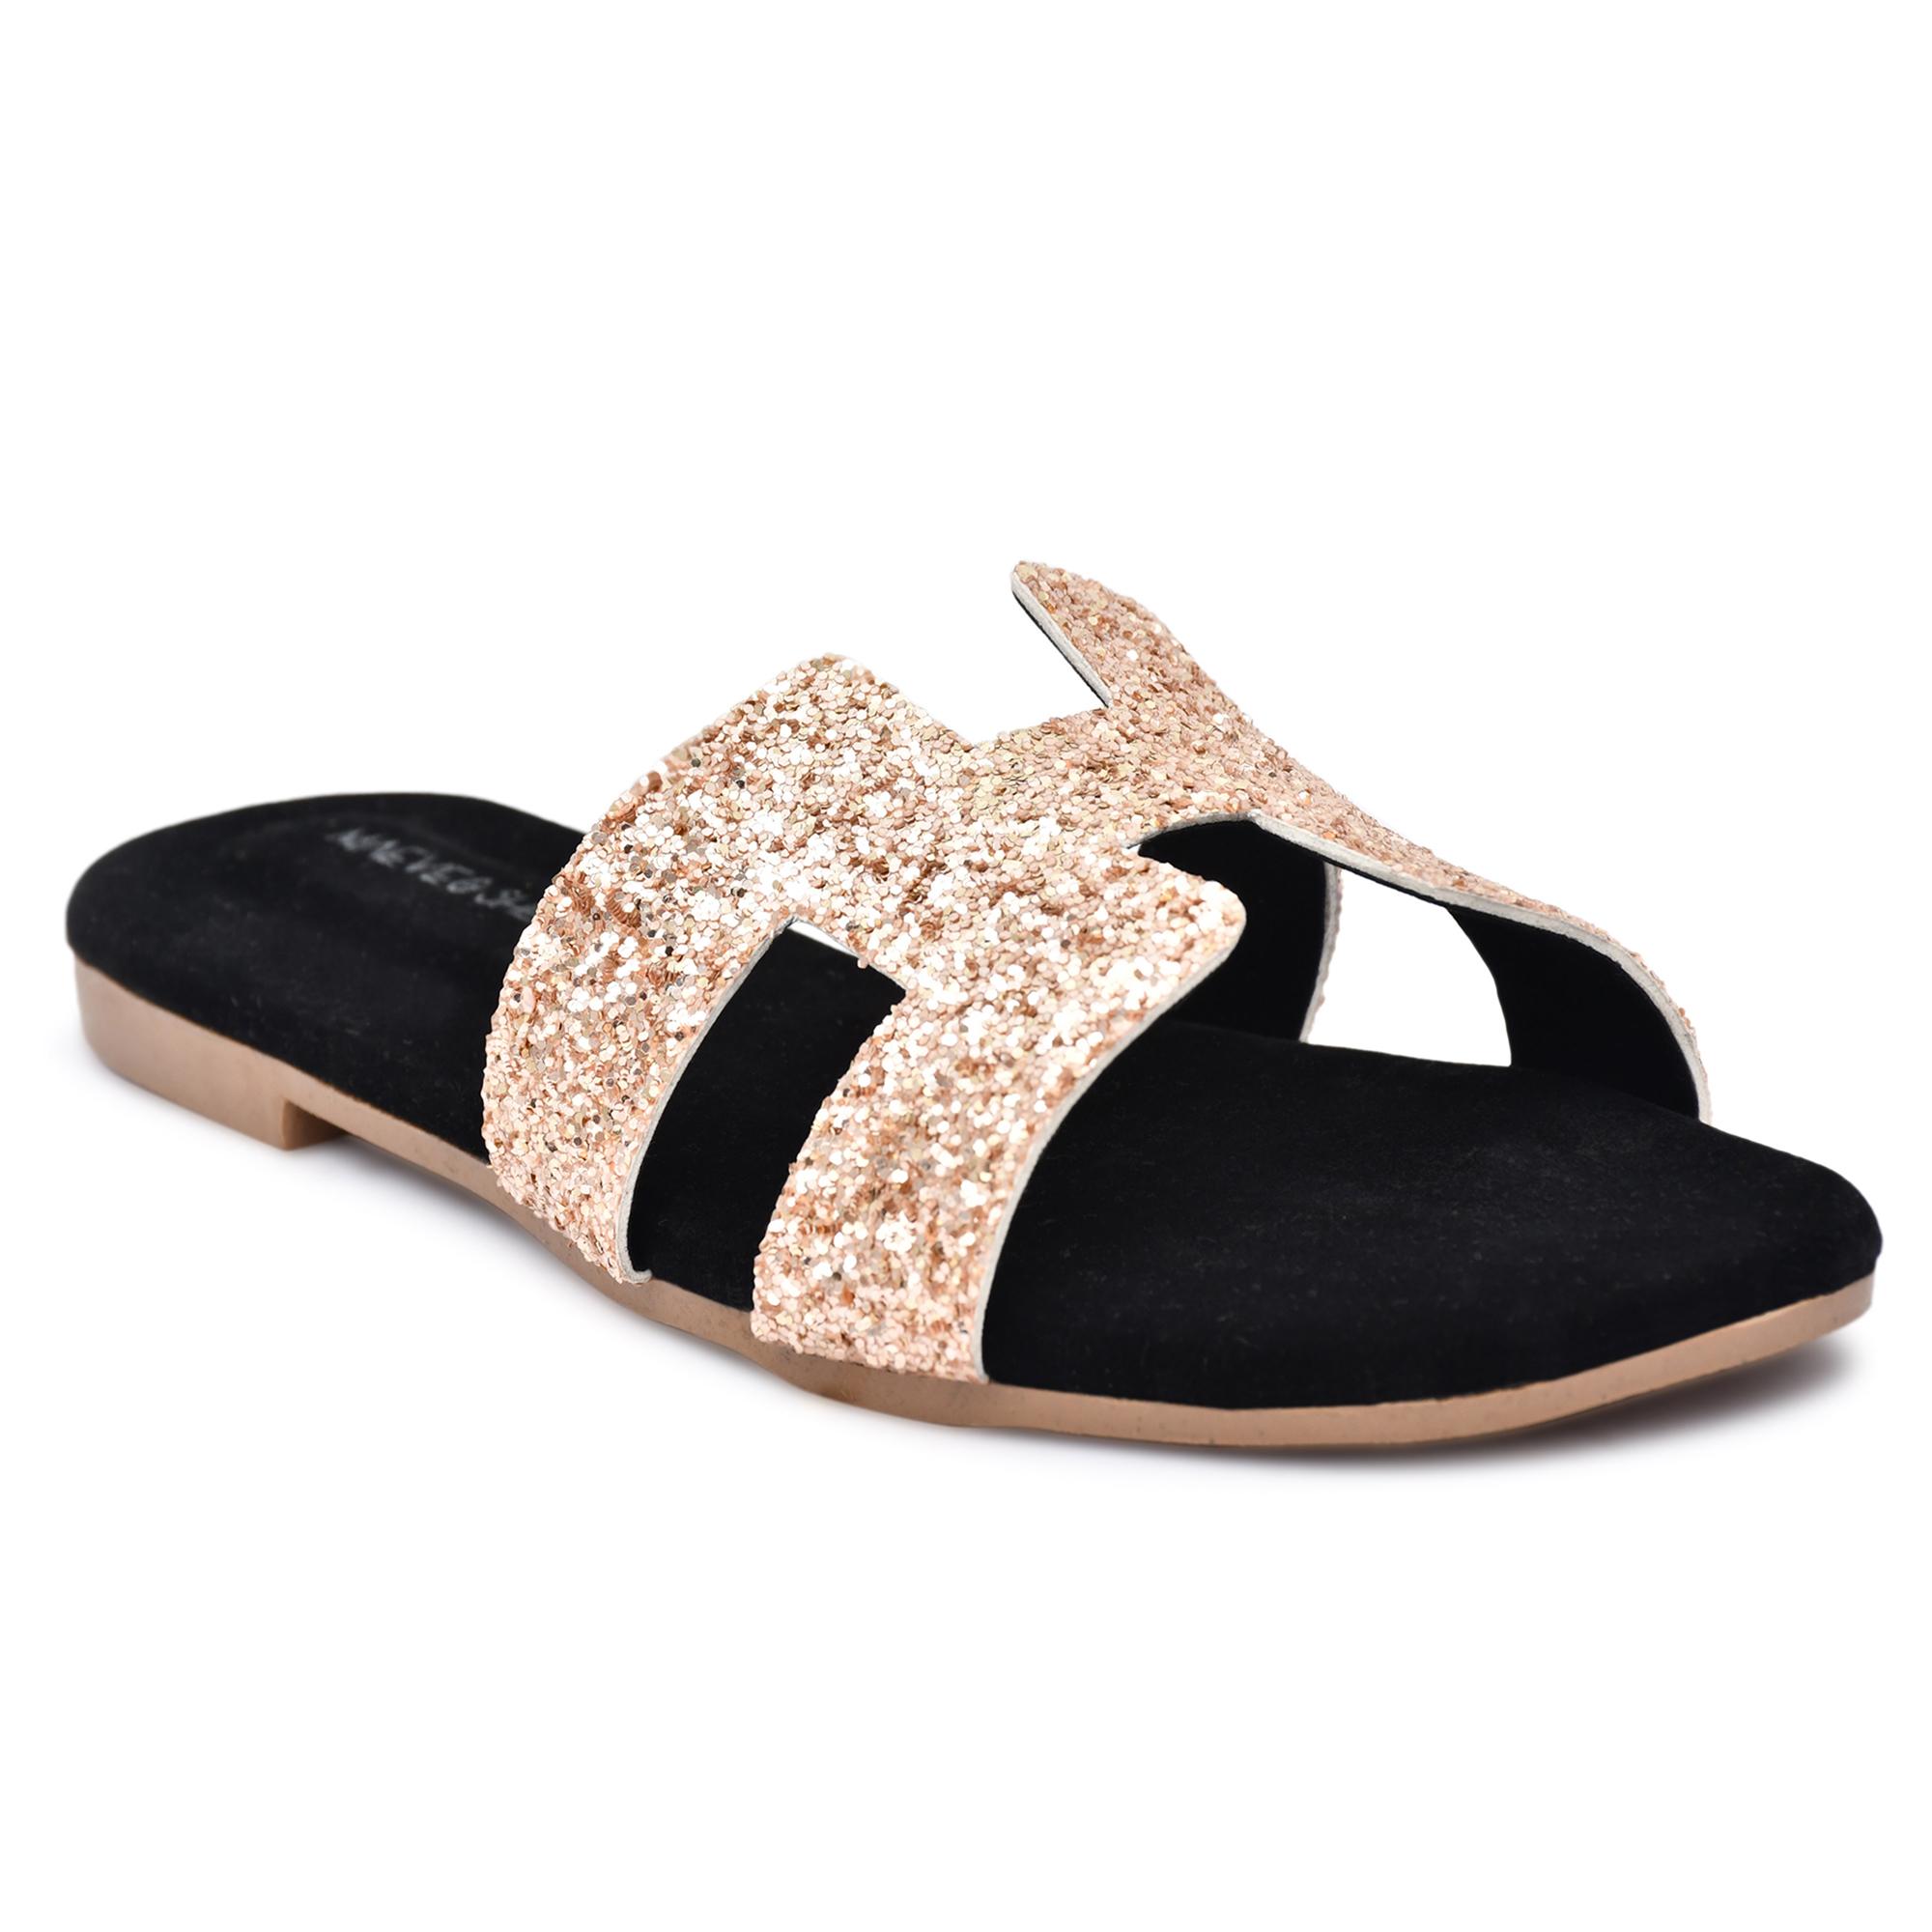 MAEVE AND SHELBY WOMEN BROWN STYLISH FLATS FOR OCCASION AND CASUAL WEAR